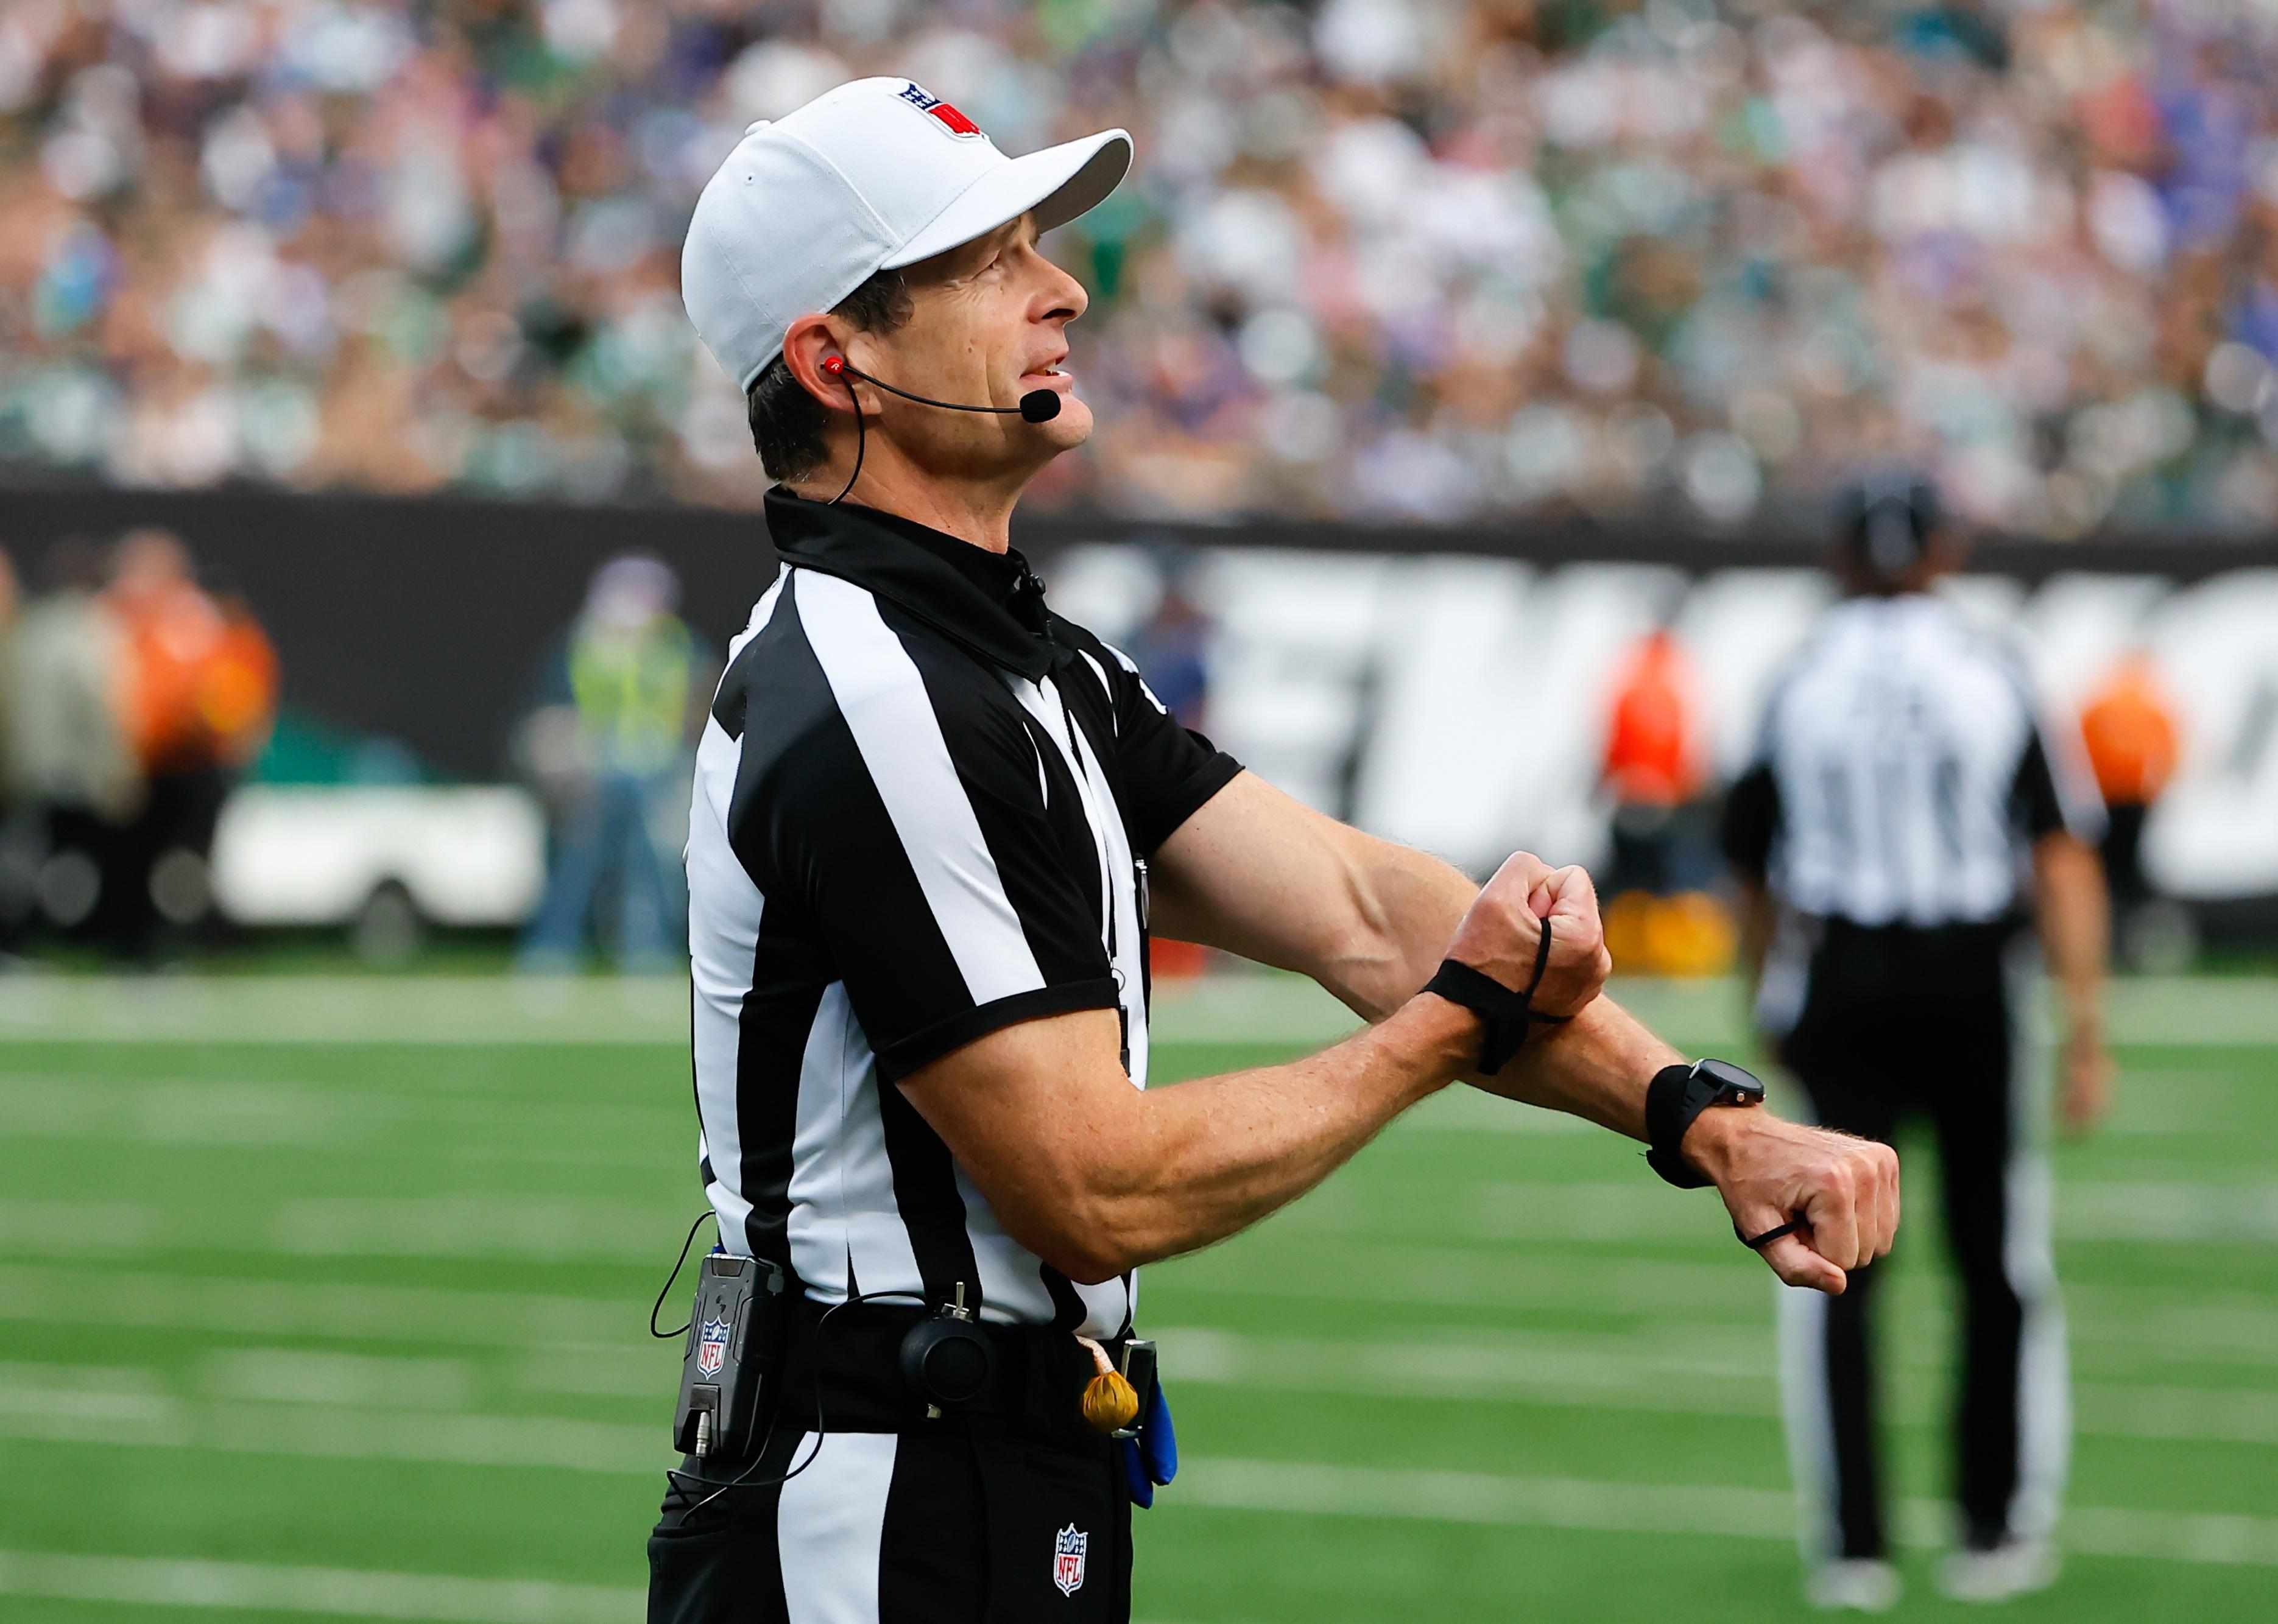 Referee Land Clark calls a penalty during a game between the New York Jets and Buffalo Bills.